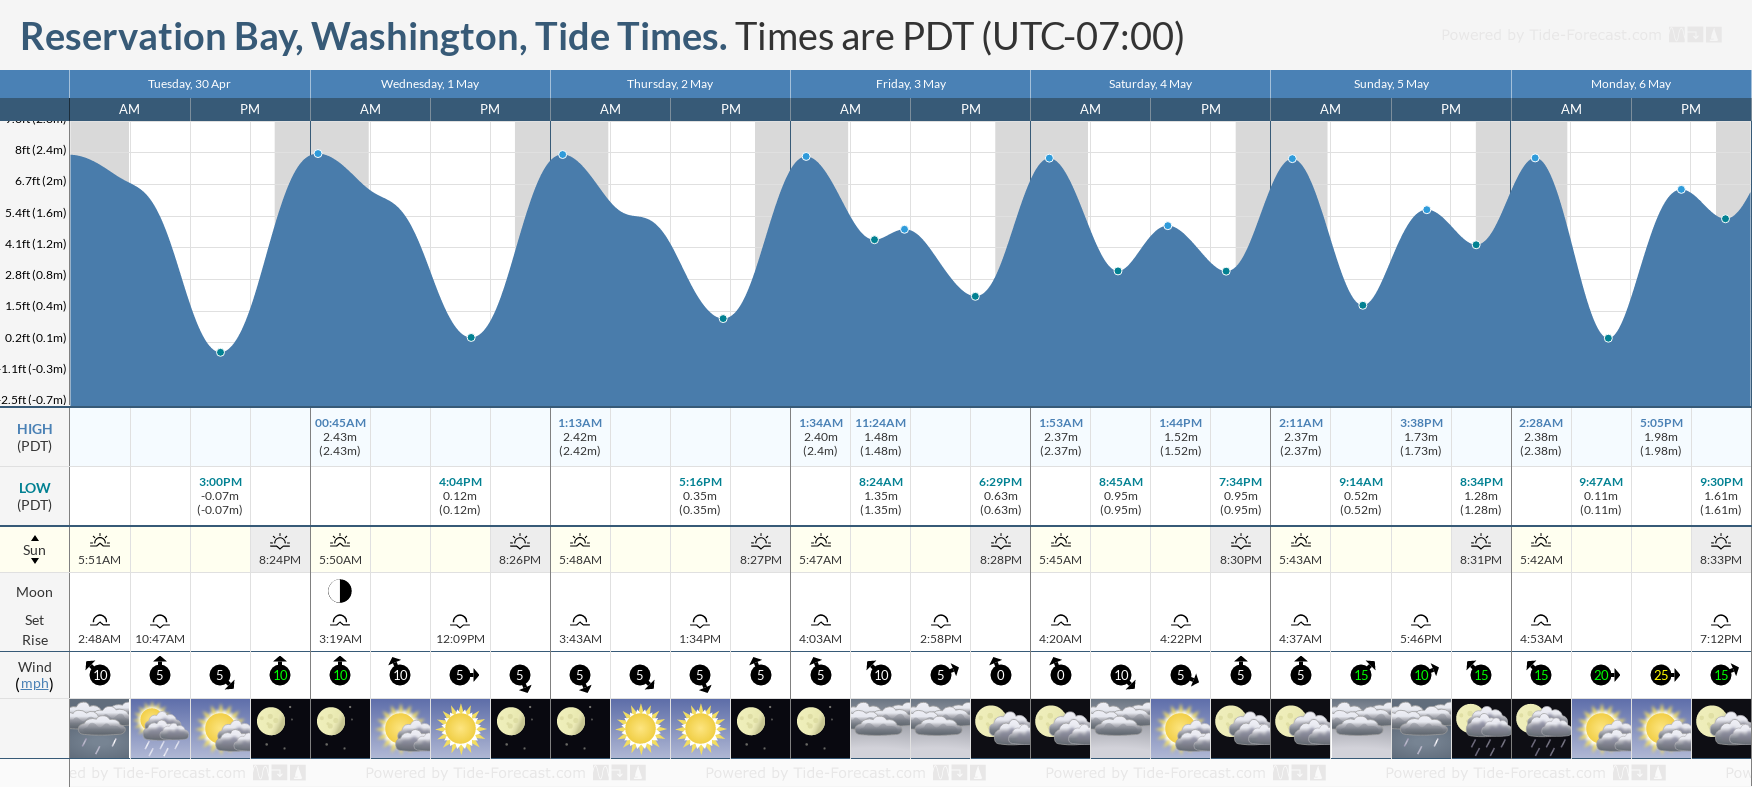 Reservation Bay, Washington Tide Chart including high and low tide tide times for the next 7 days